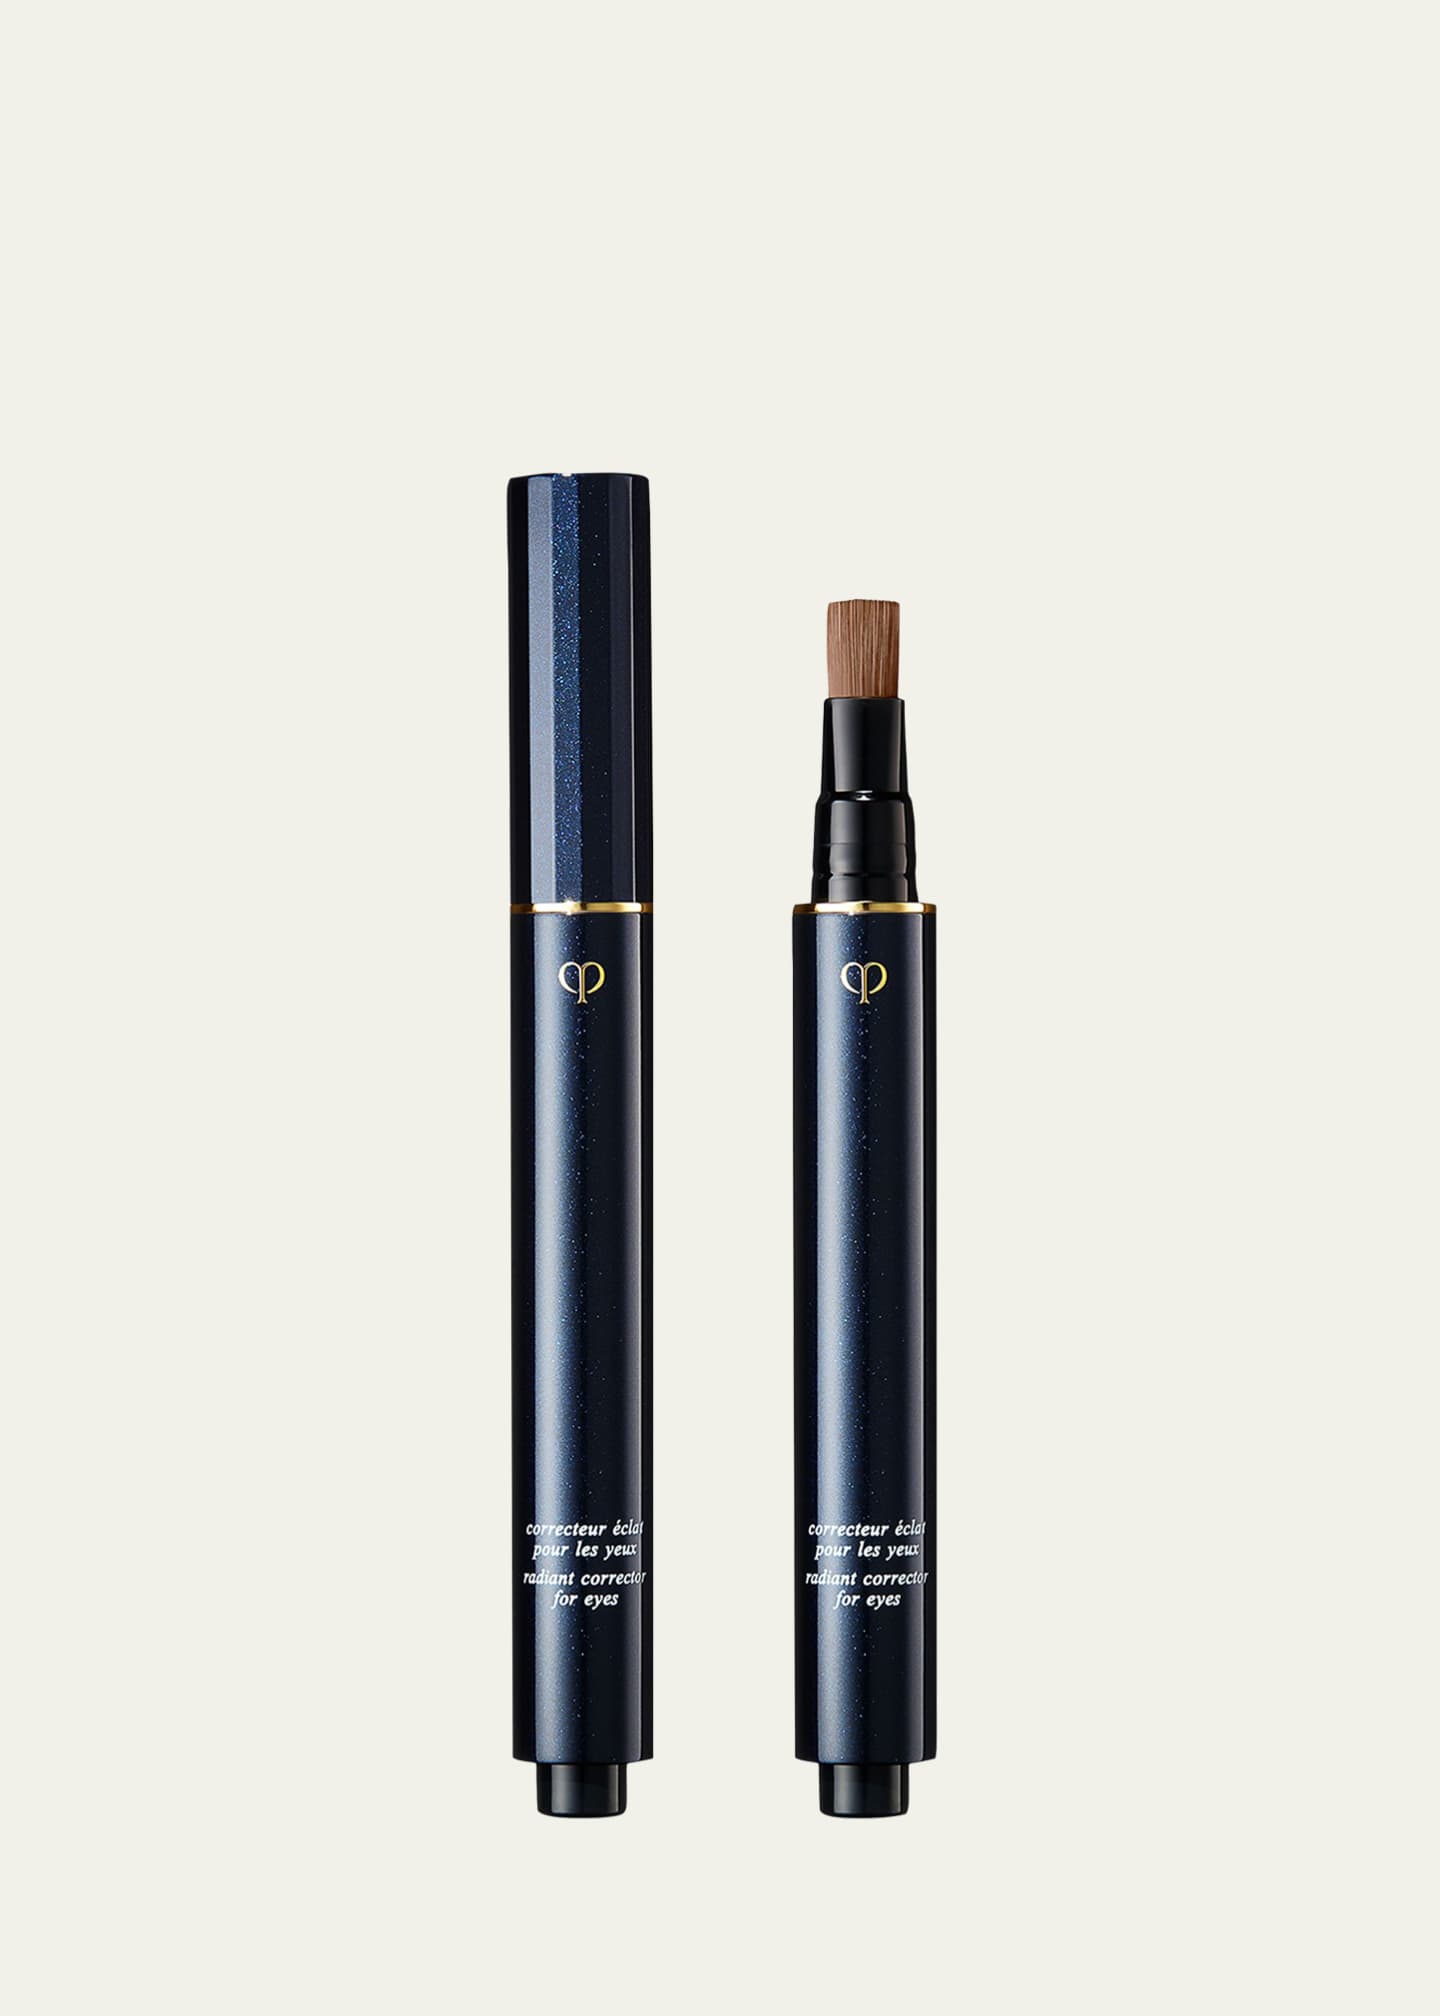 Cle de Peau Beaute Radiant Corrector for Eyes Image 1 of 5